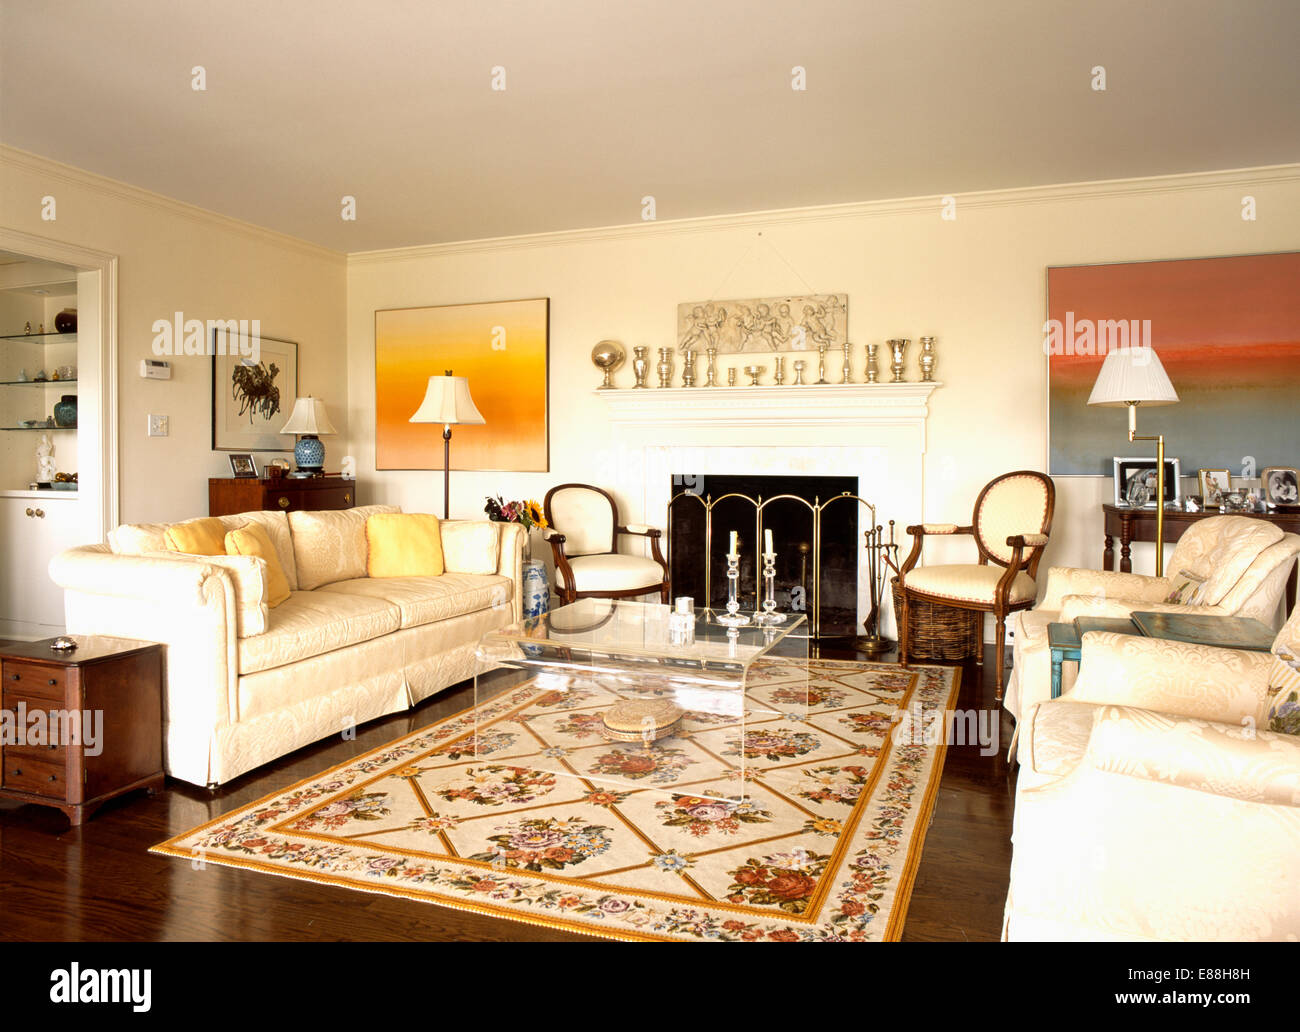 Cream sofas on either side of large floral patterned rug on floor of modern living room Stock Photo